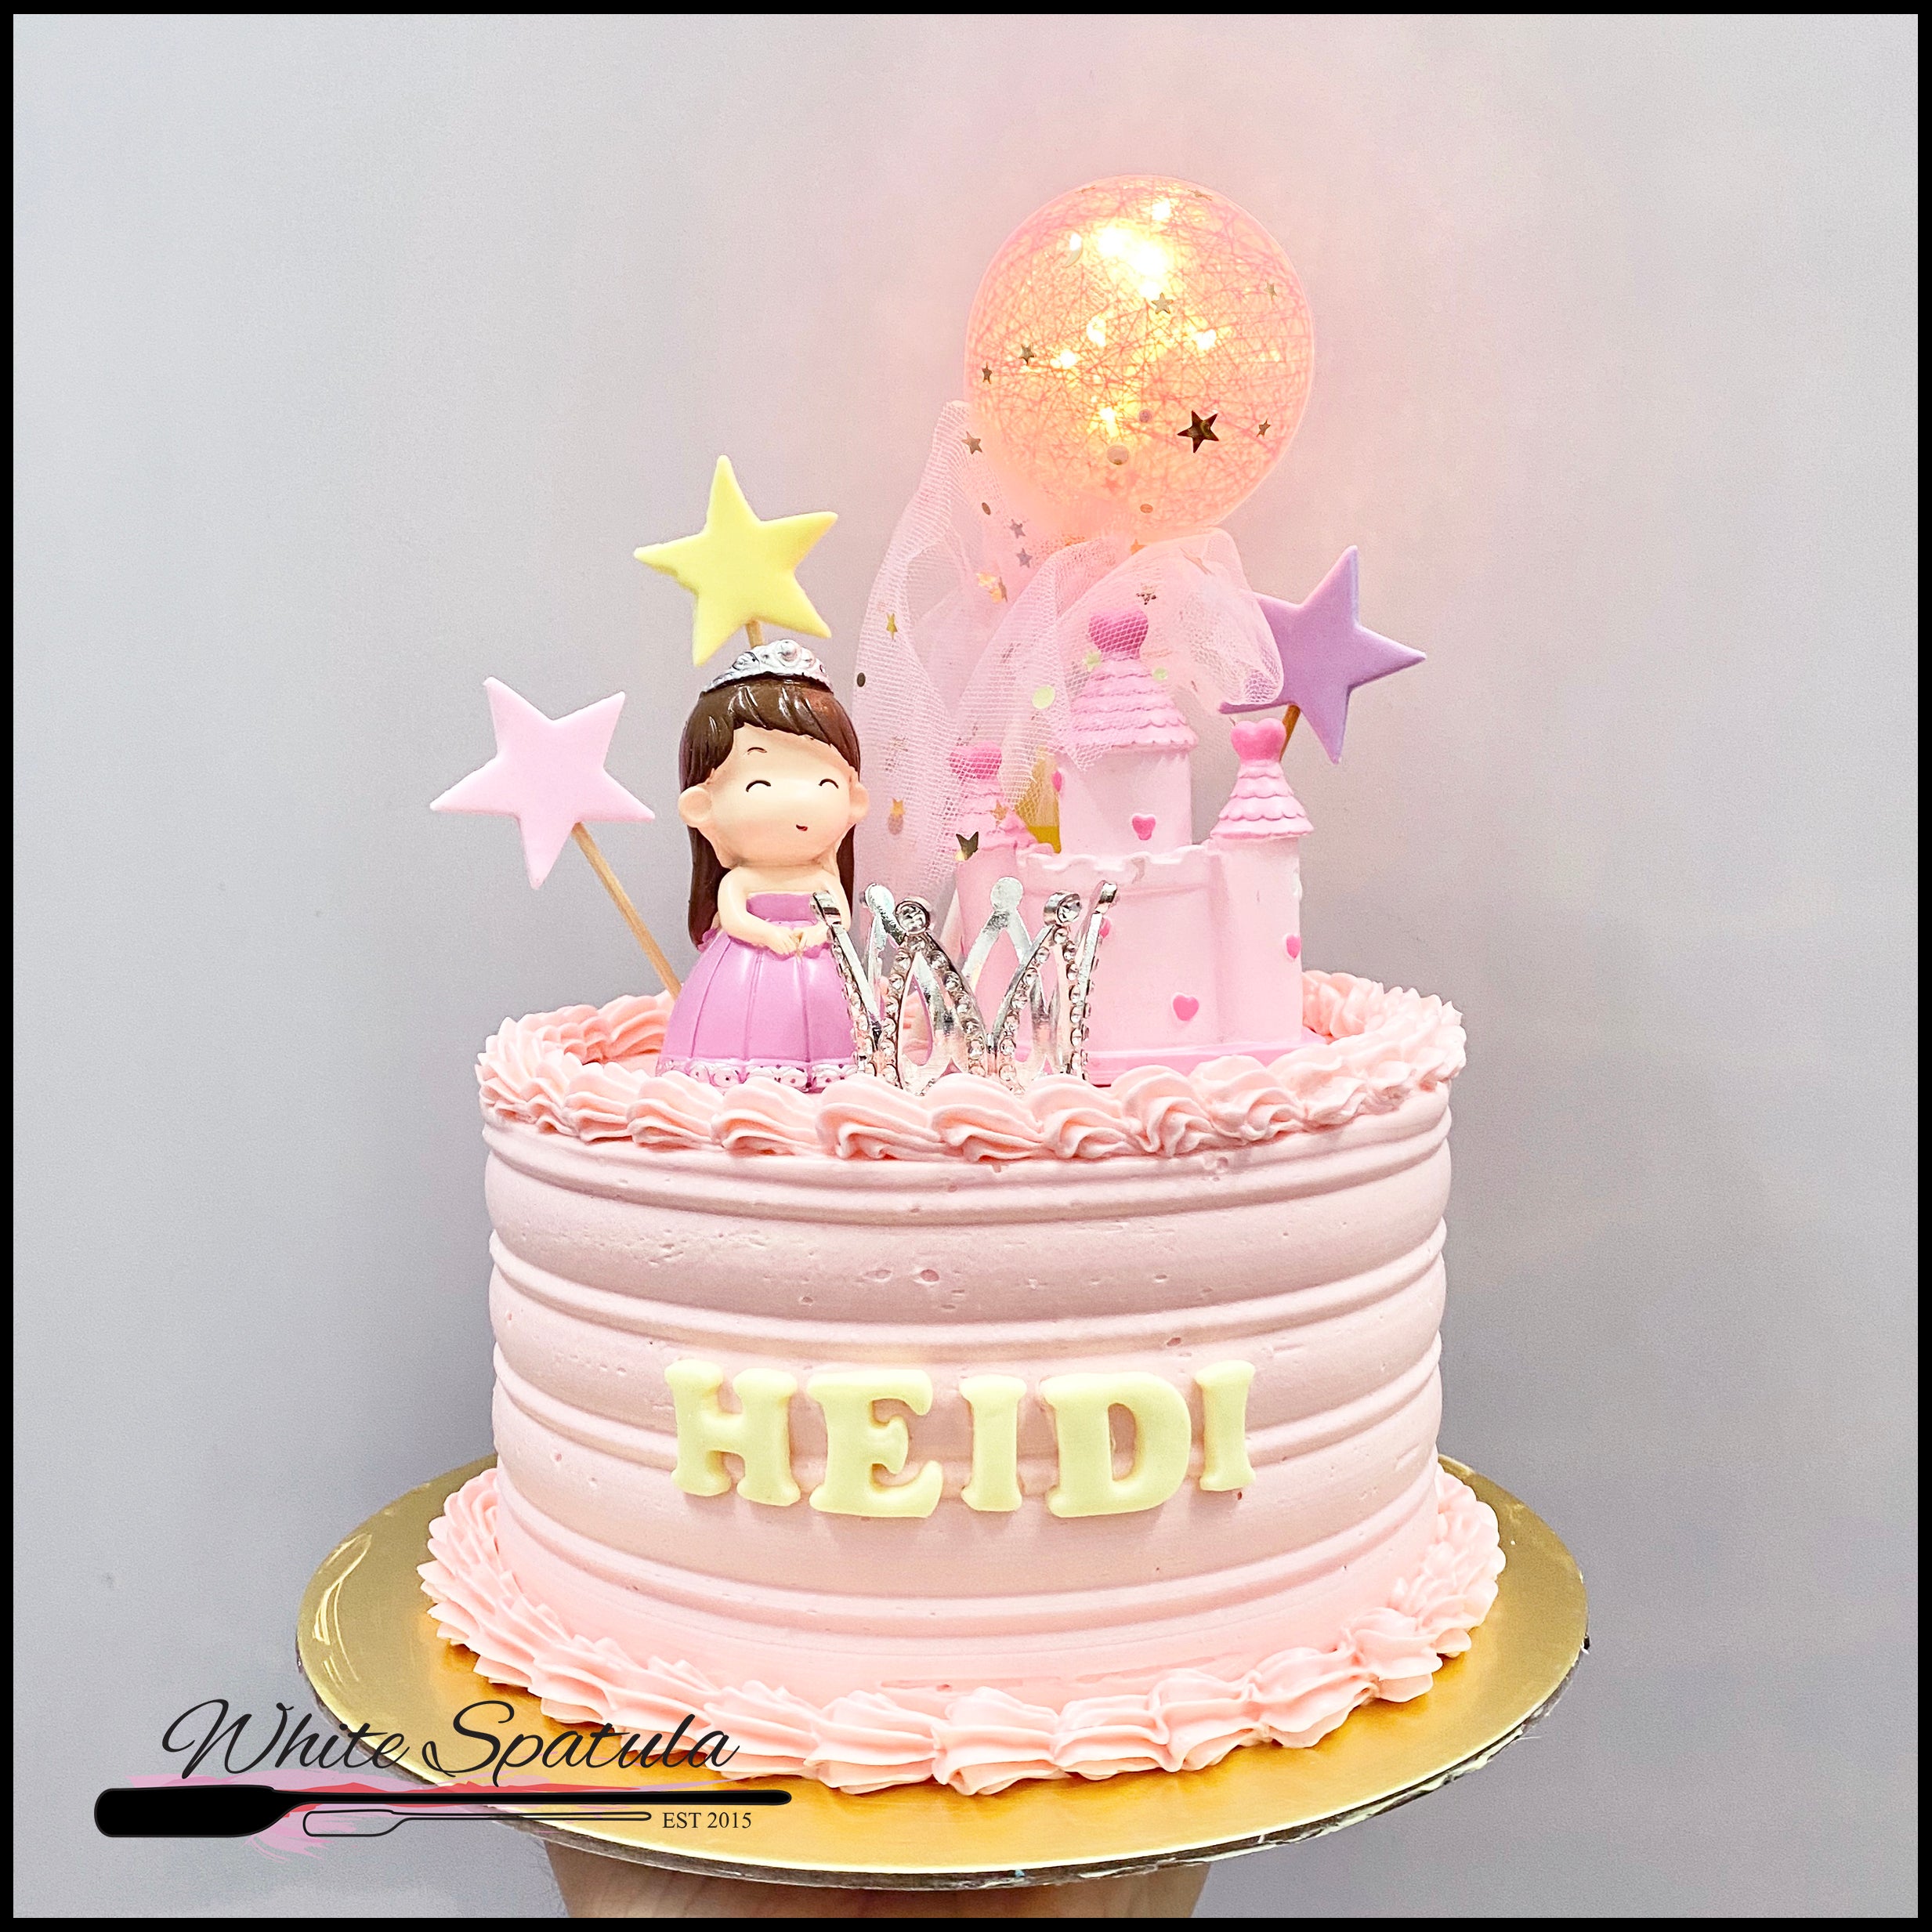 Home Beautiful Soft Pink Cake With Curd Cream, Strawberry And Decoration In  The Form Of A Crown Princess Stock Photo, Picture And Royalty Free Image.  Image 99541074.